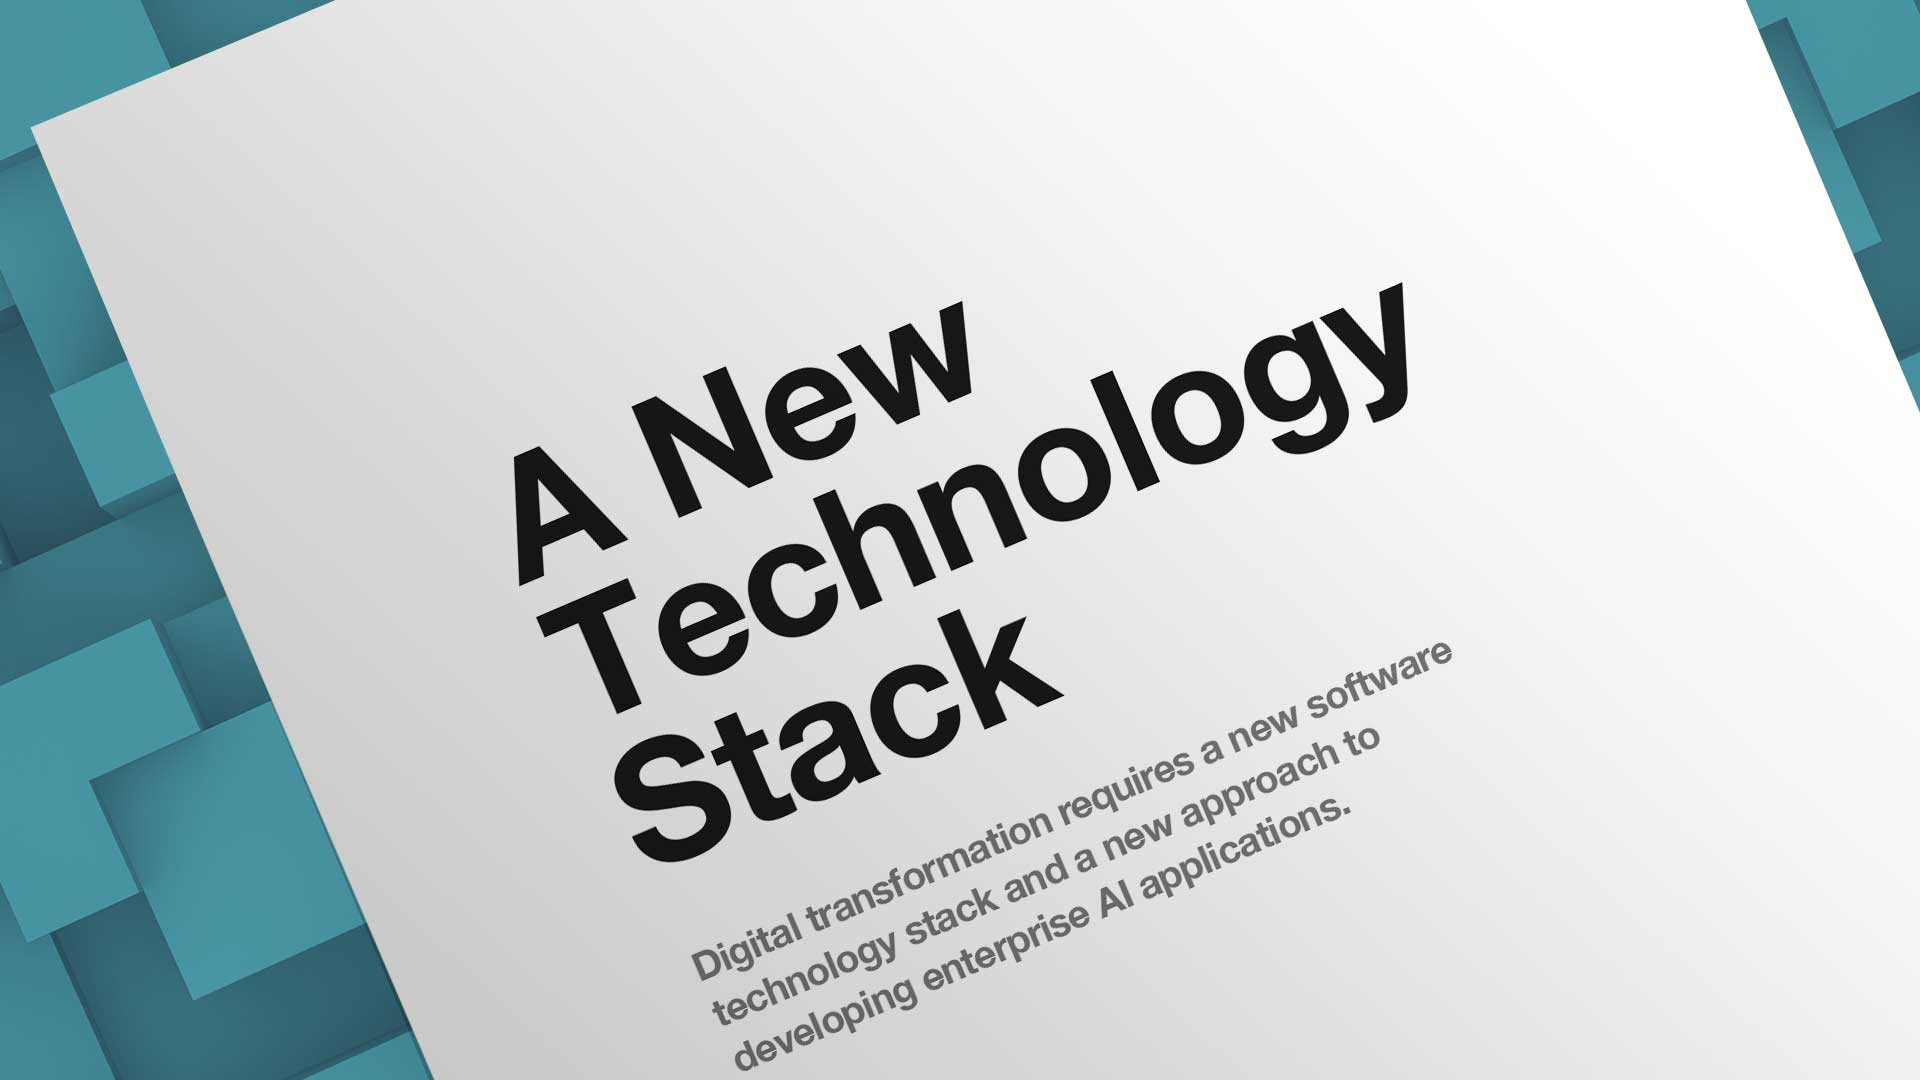 A New Technology Stack